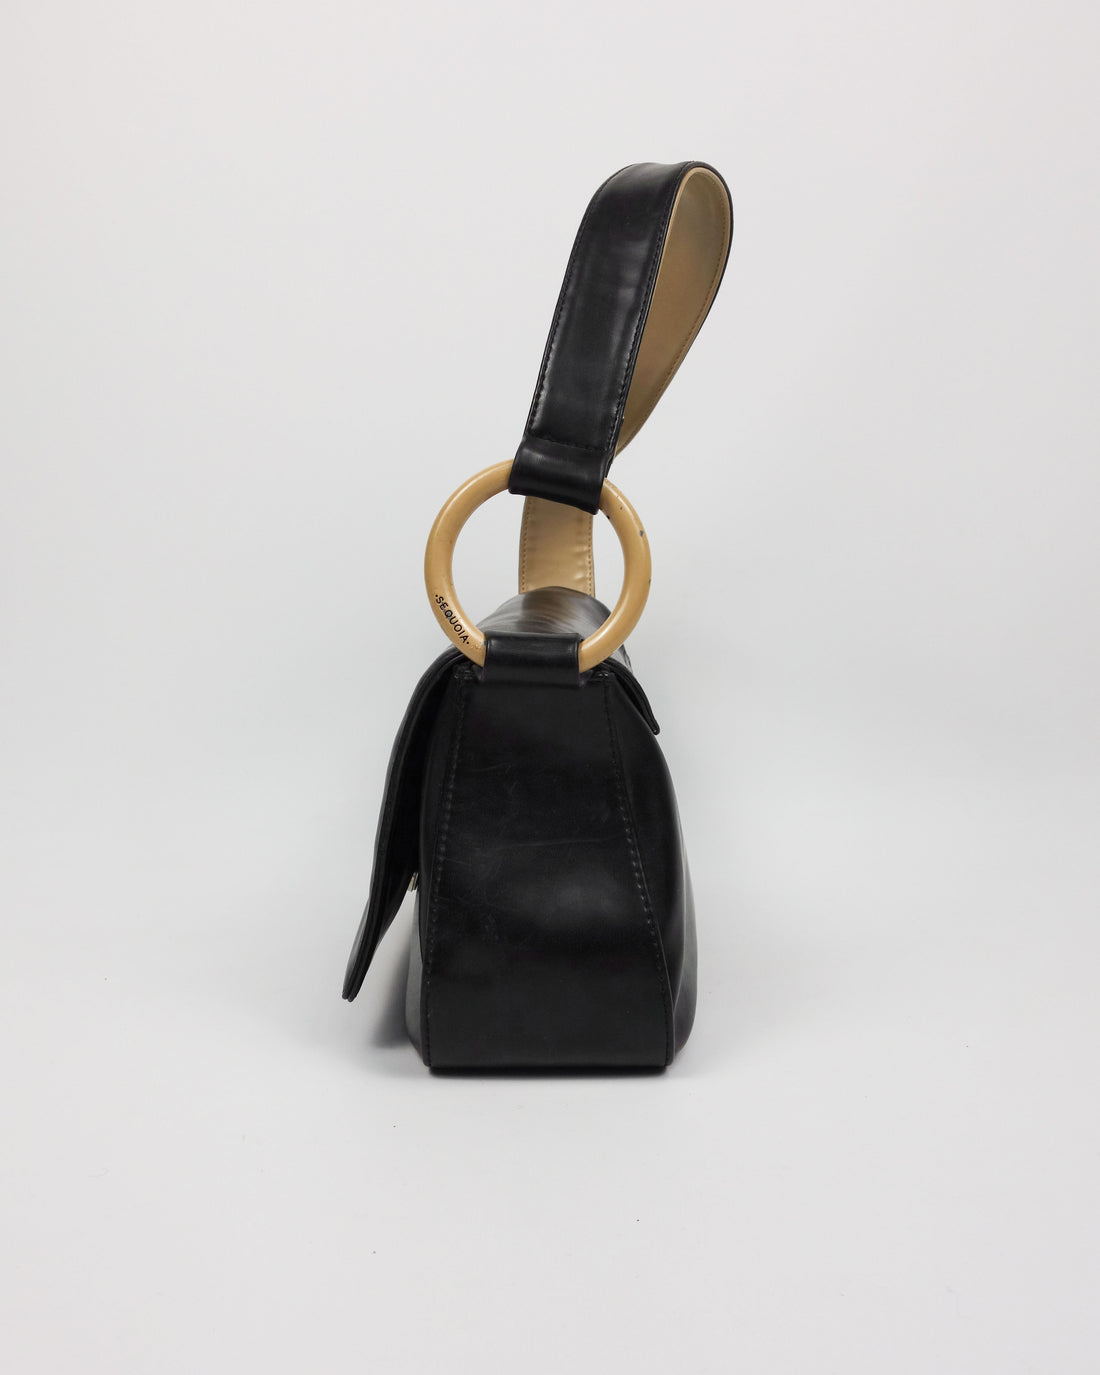 Sequoia Beige Ring Black Synthetic Leather Bag 2000's